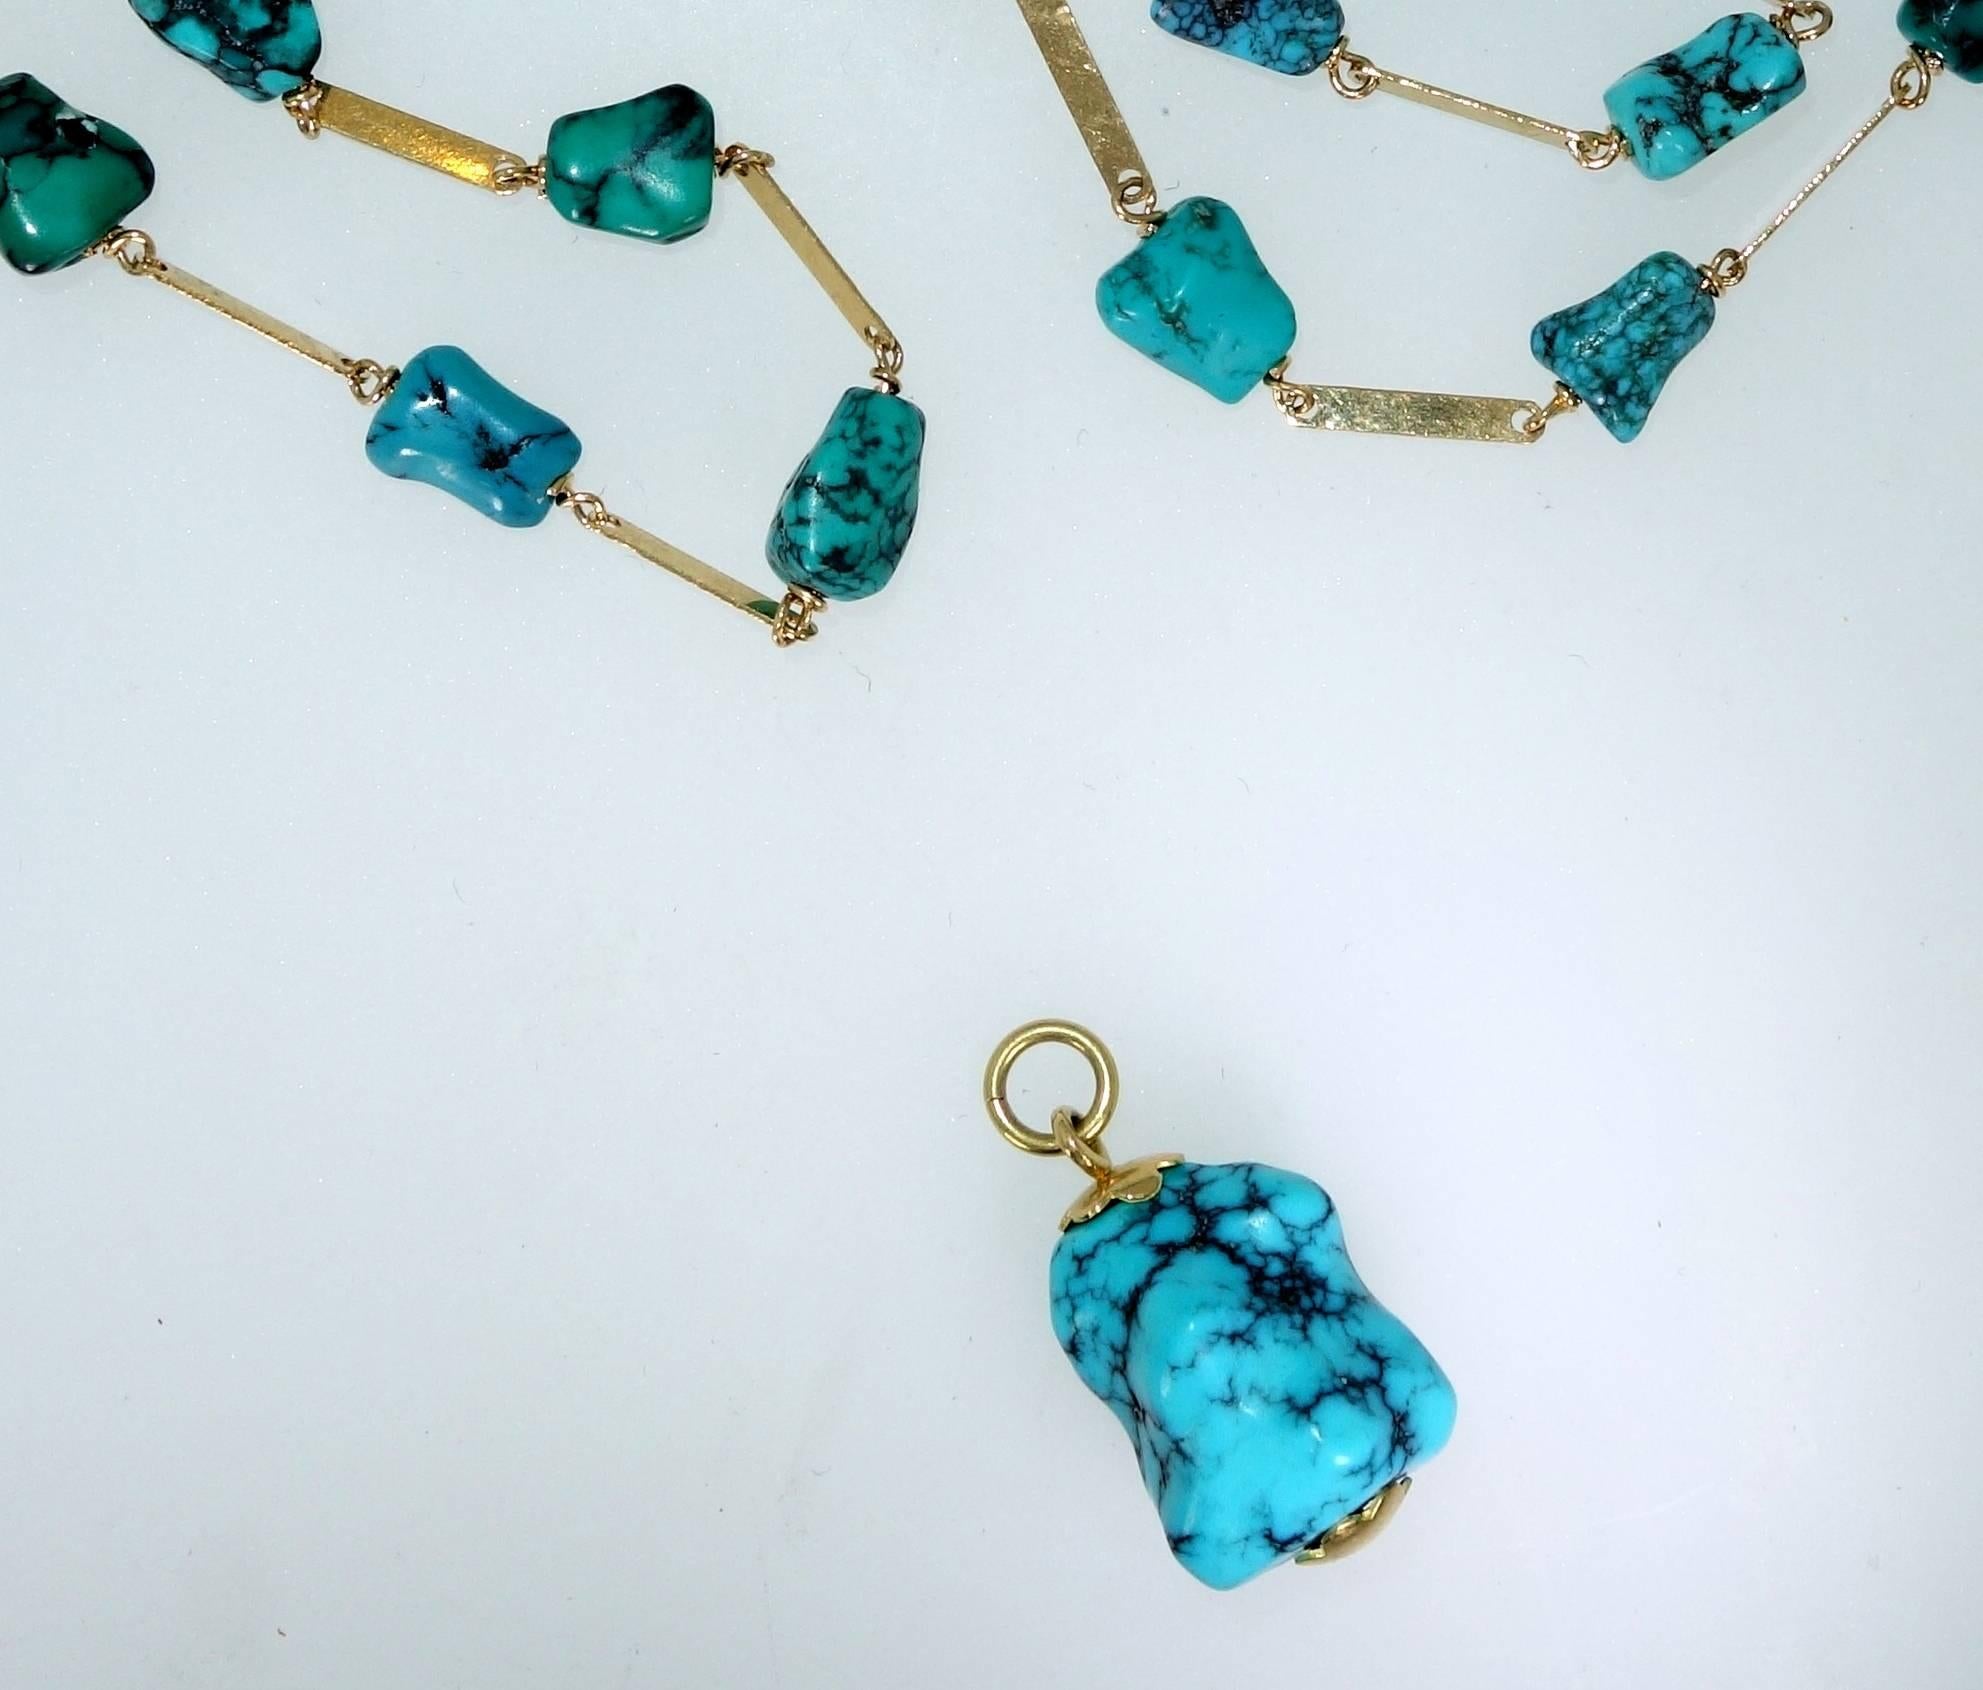 Natural Persian turquoise and 18K long necklace with large removeable turquoise nugget at the bottom.  This nugget with natural matrix matches the turquoise in the long chain, it is one inch by .5 inches.  The necklace is 28 inches long.  The piece